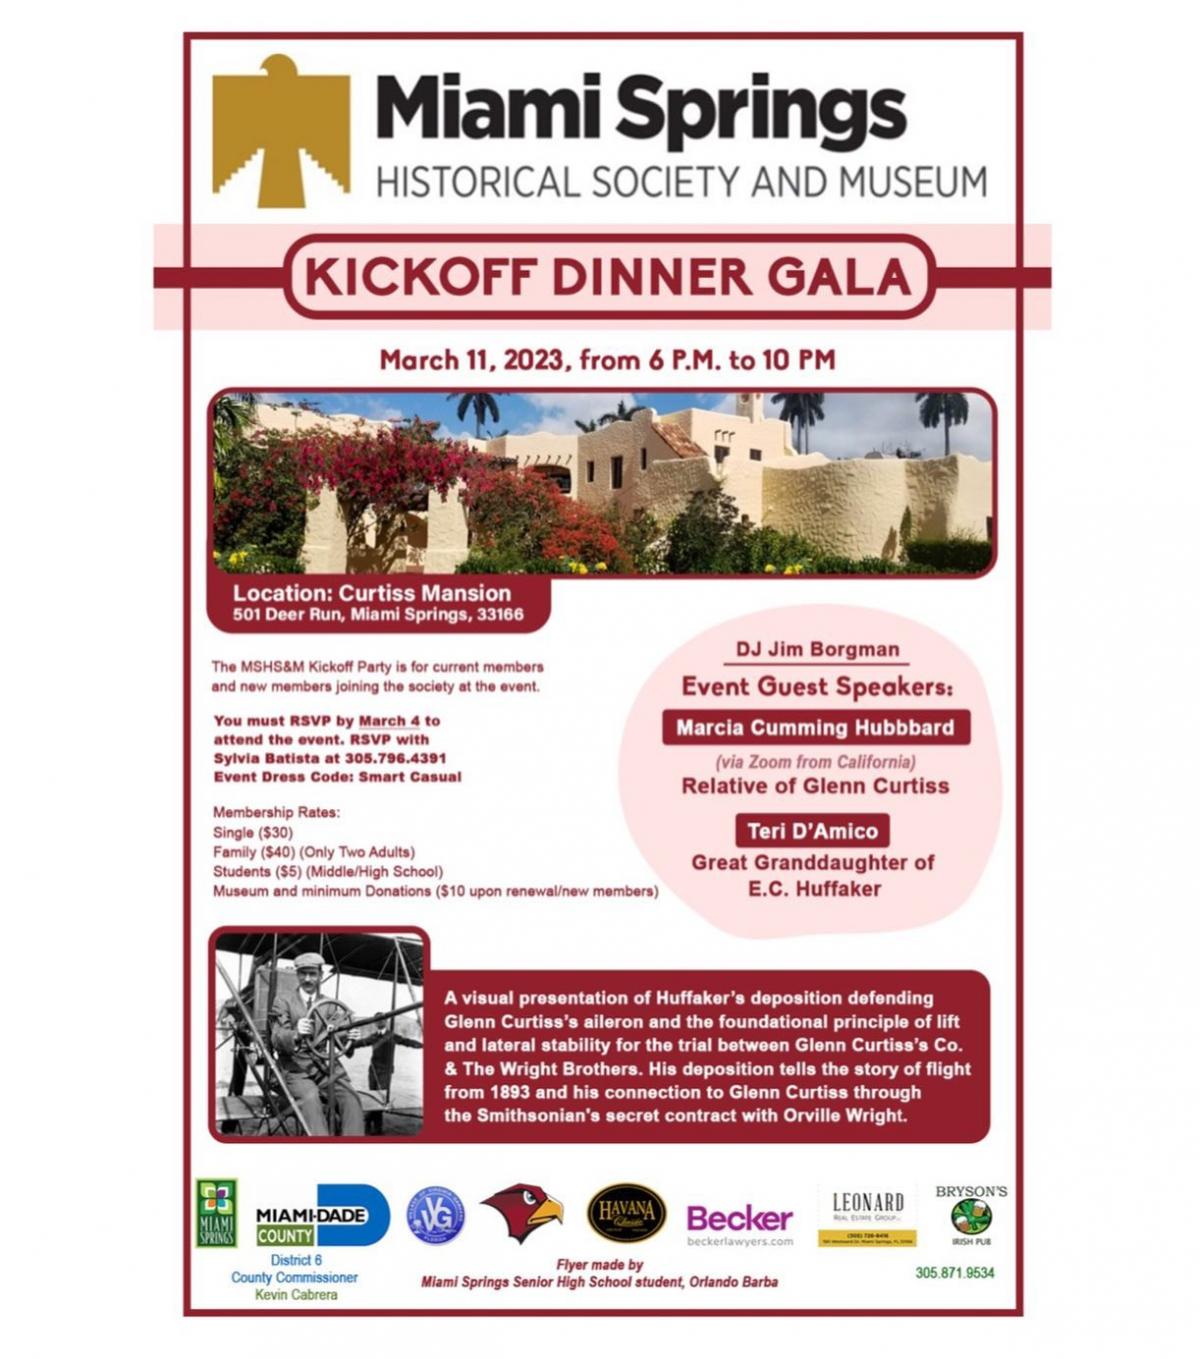 Miami Springs Historical Society and Museum presents Kickoff Dinner Gala on March 11, 2023, from 6 PM to 10 PM 